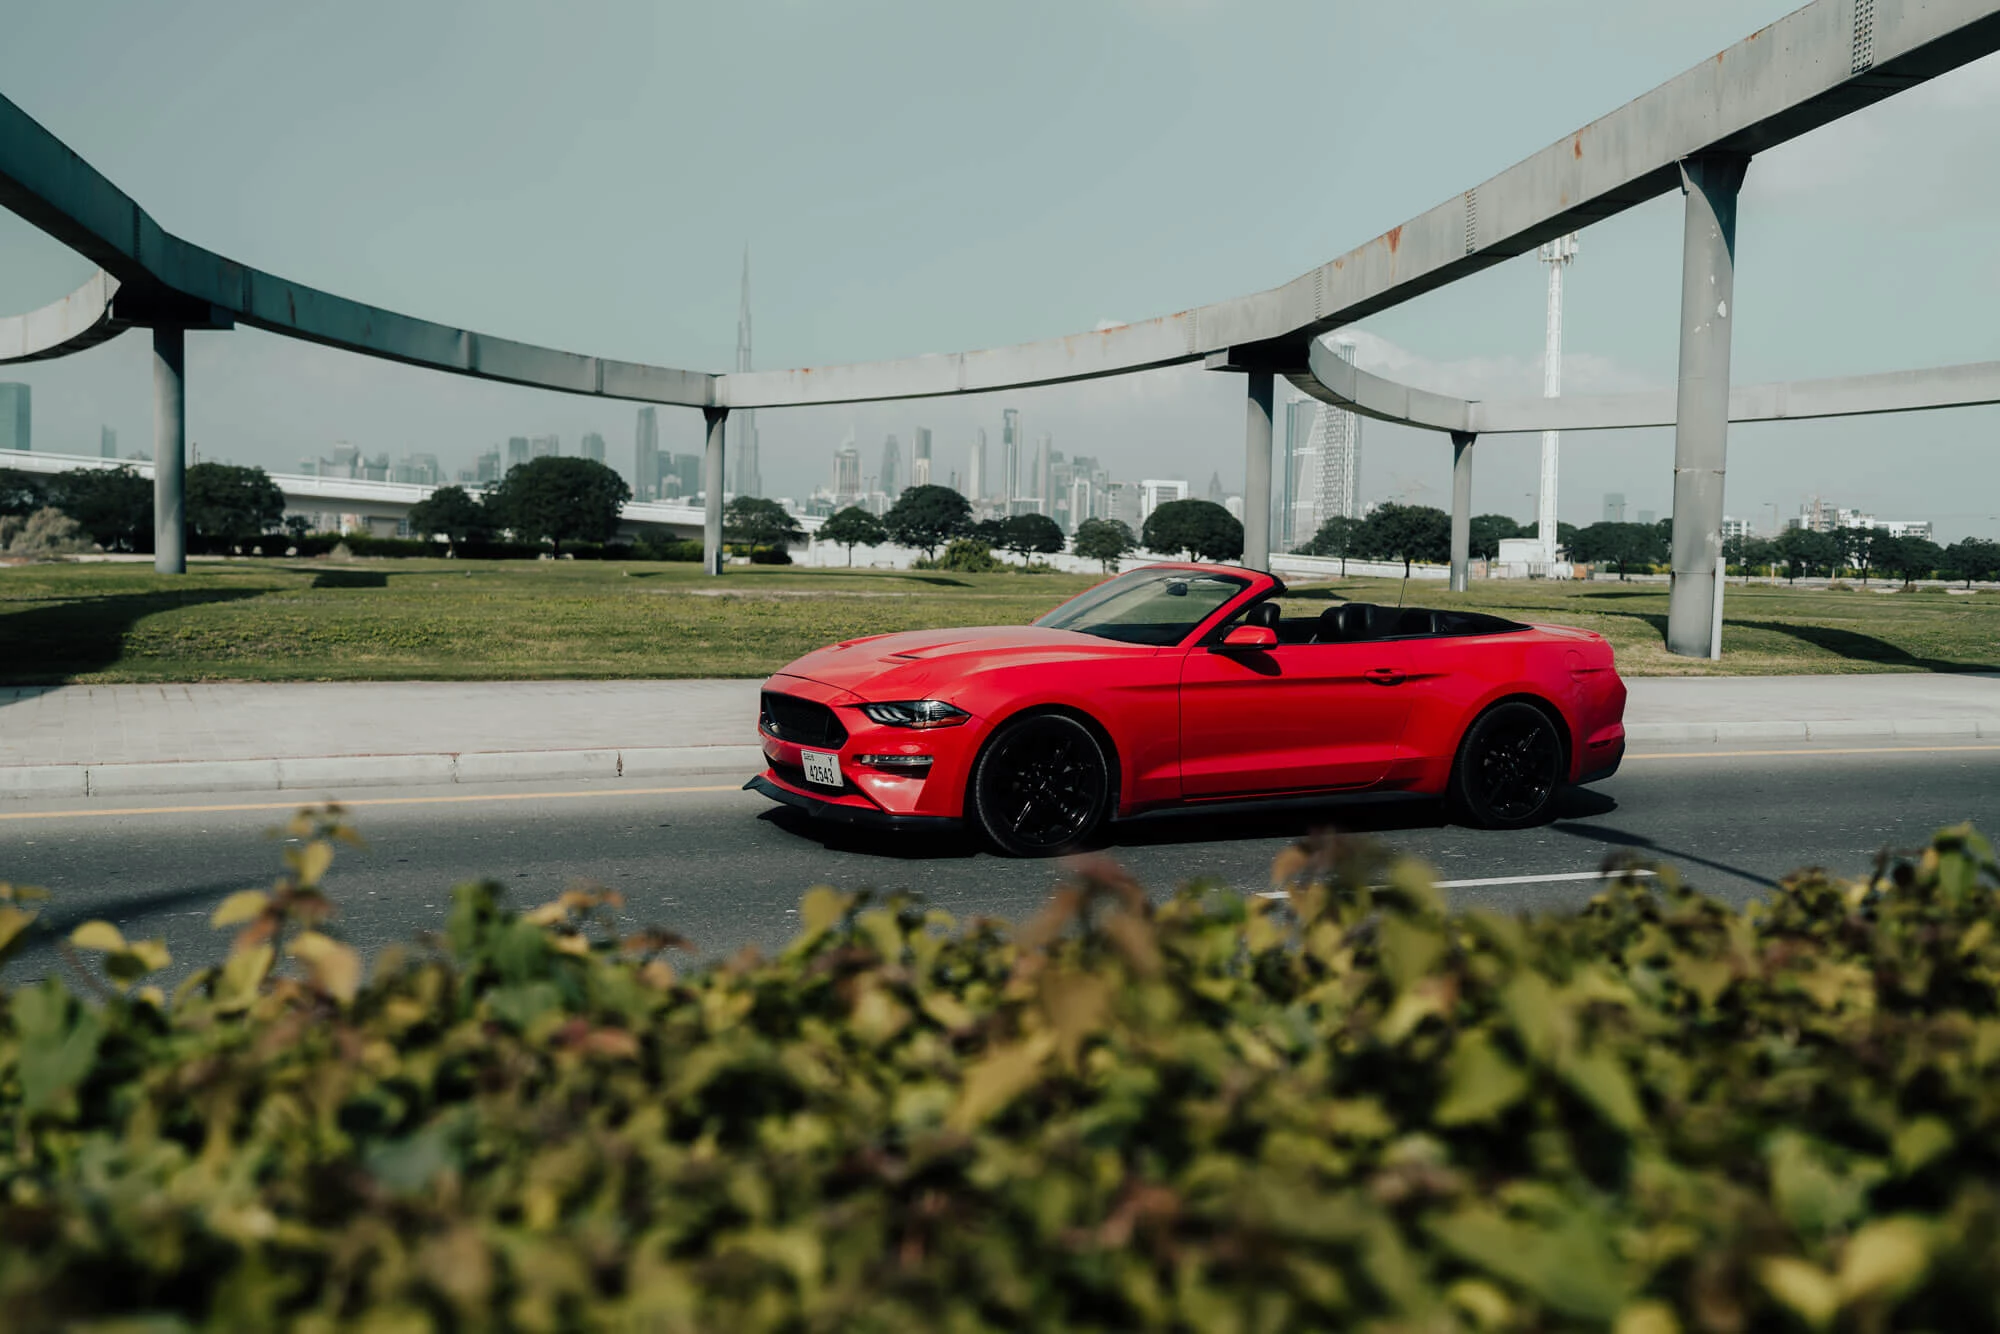 Ford Mustang rossa